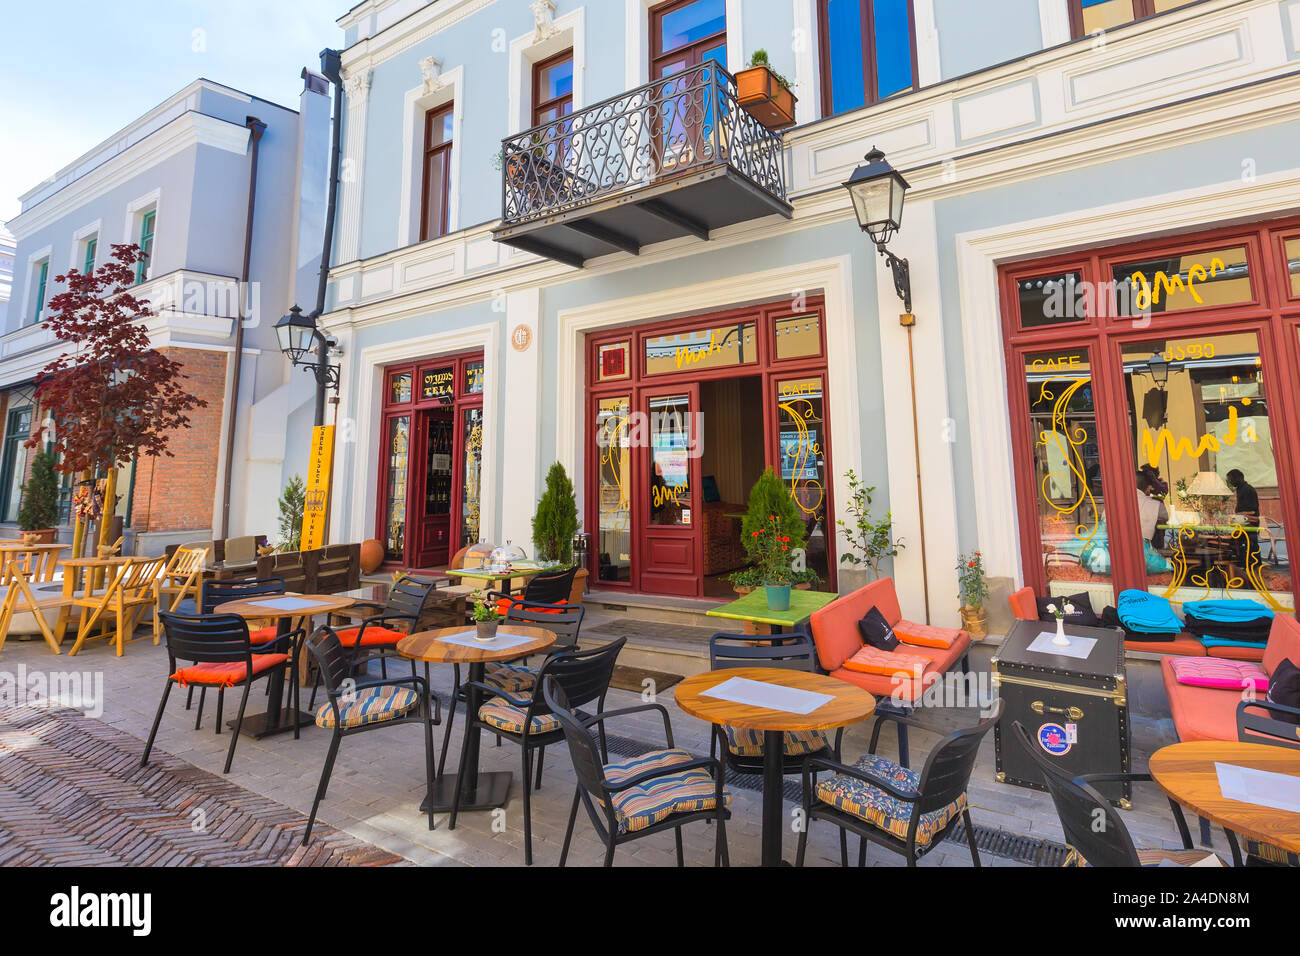 Tbilisi, Georgia - April 24, 2017: Street restaurant in the old town of Tbilisi, Geogria Stock Photo